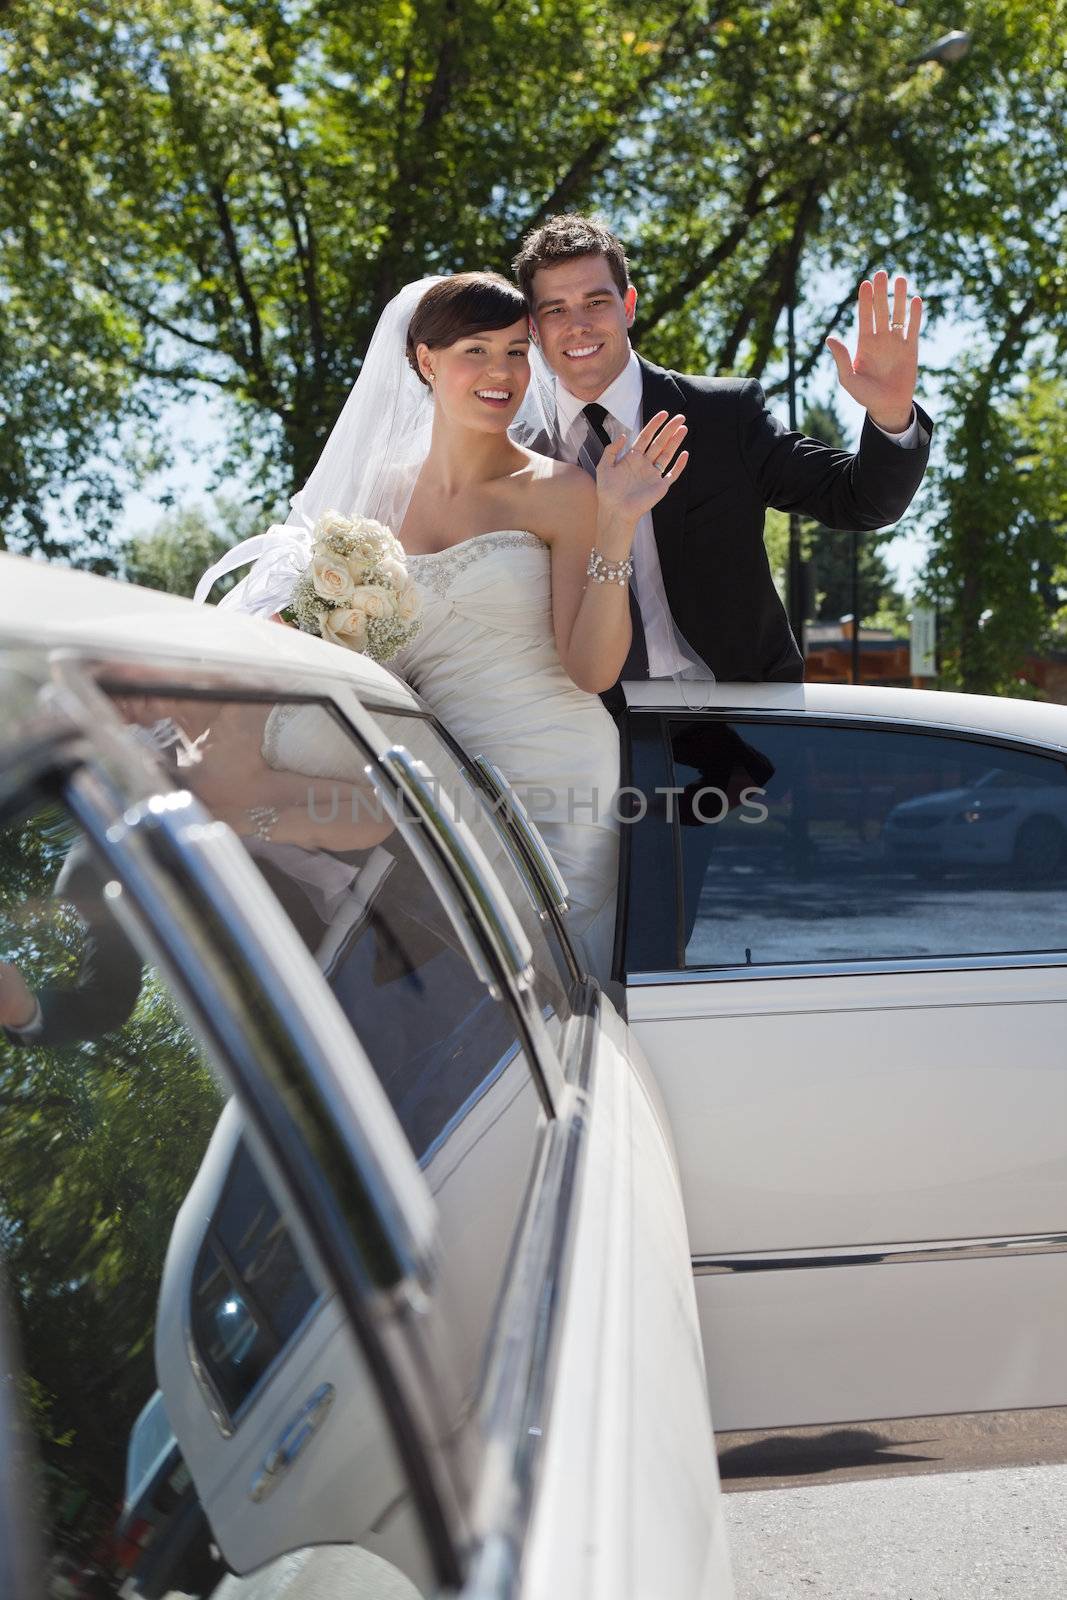 Bride and groom standing in Limo waving